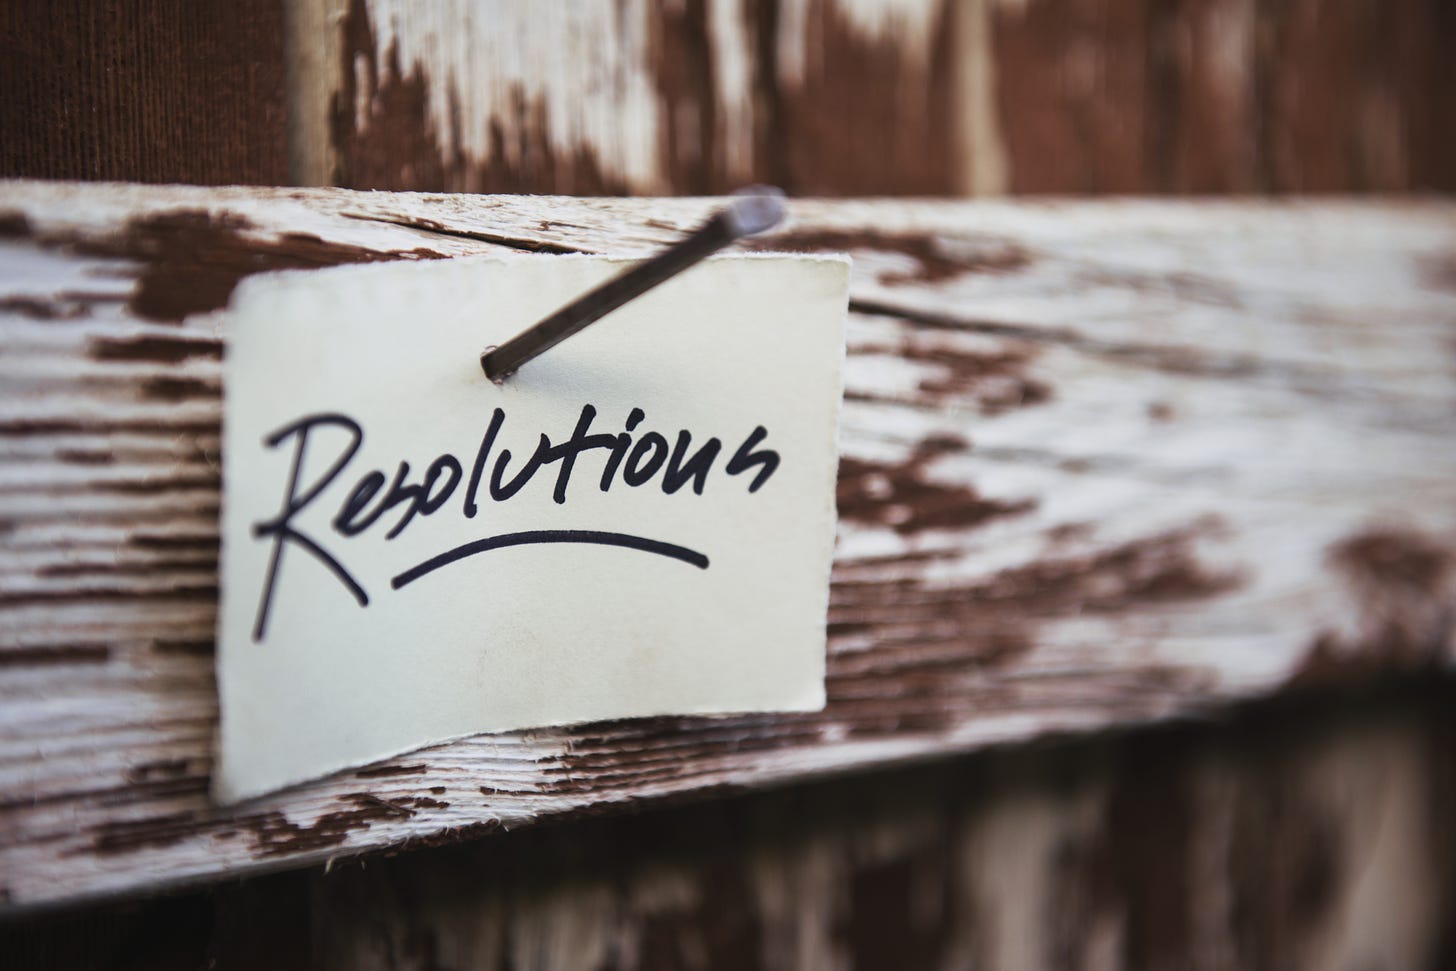 The word "resolution" is written in black ink on a white index card. The card is nailed to a wooden beam.